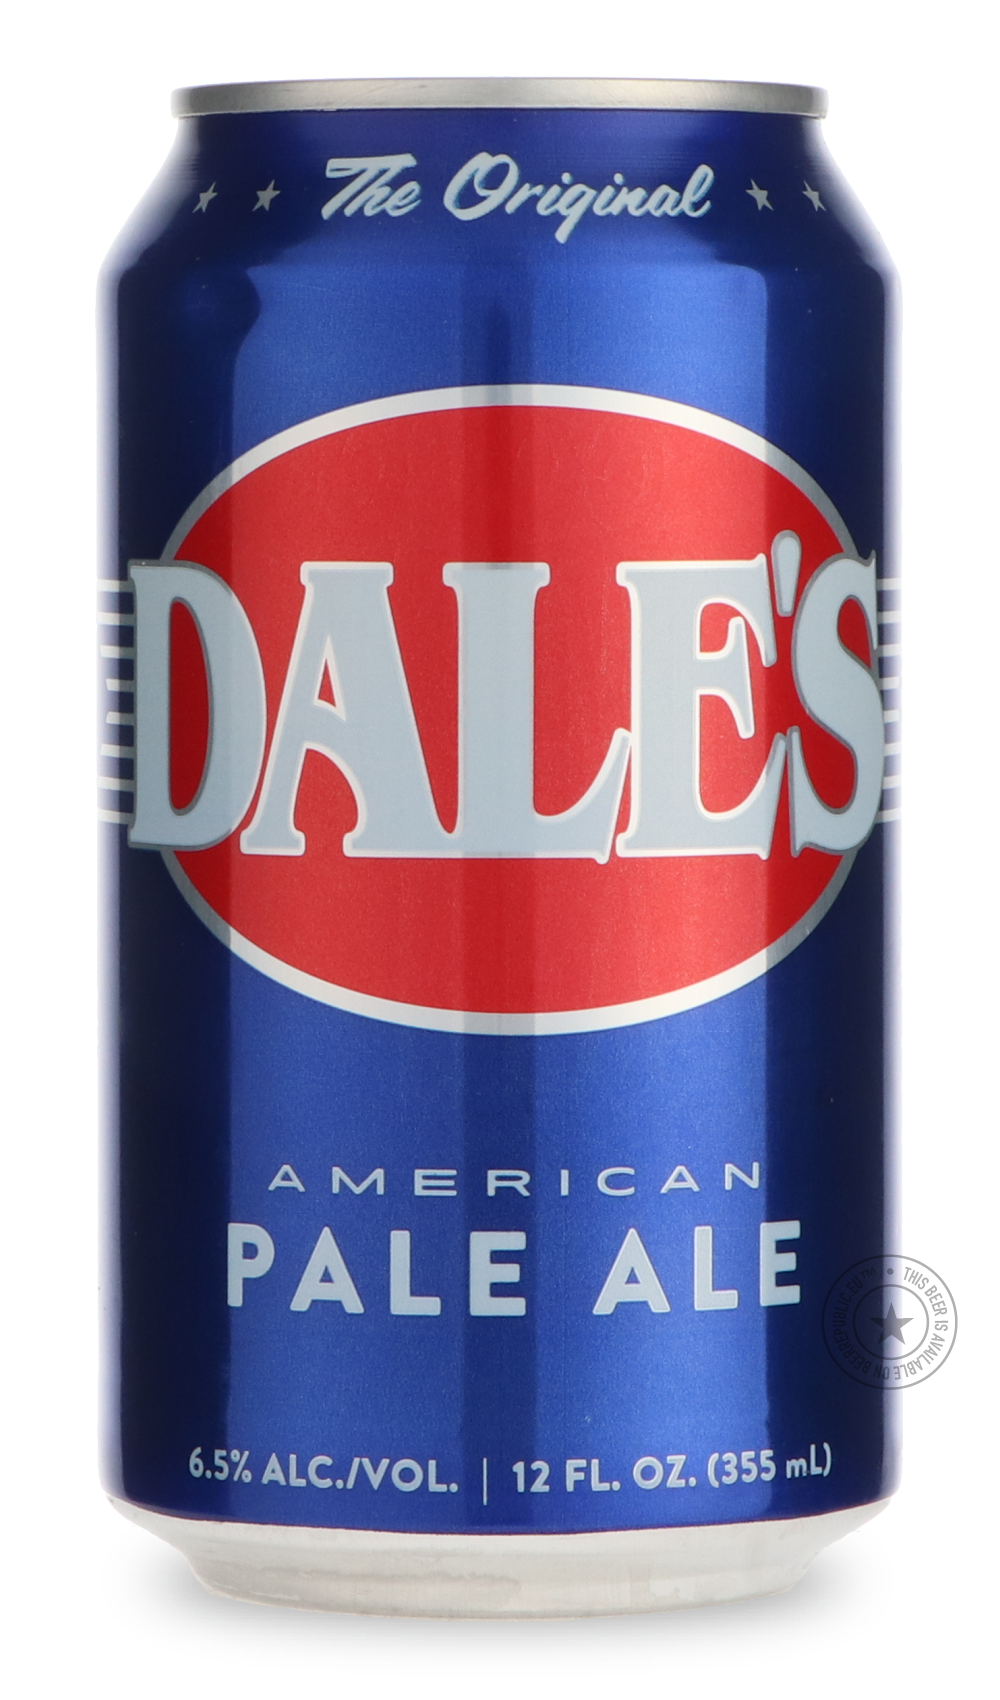 -Oskar Blues- Dale's Pale Ale-Pale- Only @ Beer Republic - The best online beer store for American & Canadian craft beer - Buy beer online from the USA and Canada - Bier online kopen - Amerikaans bier kopen - Craft beer store - Craft beer kopen - Amerikanisch bier kaufen - Bier online kaufen - Acheter biere online - IPA - Stout - Porter - New England IPA - Hazy IPA - Imperial Stout - Barrel Aged - Barrel Aged Imperial Stout - Brown - Dark beer - Blond - Blonde - Pilsner - Lager - Wheat - Weizen - Amber - Ba